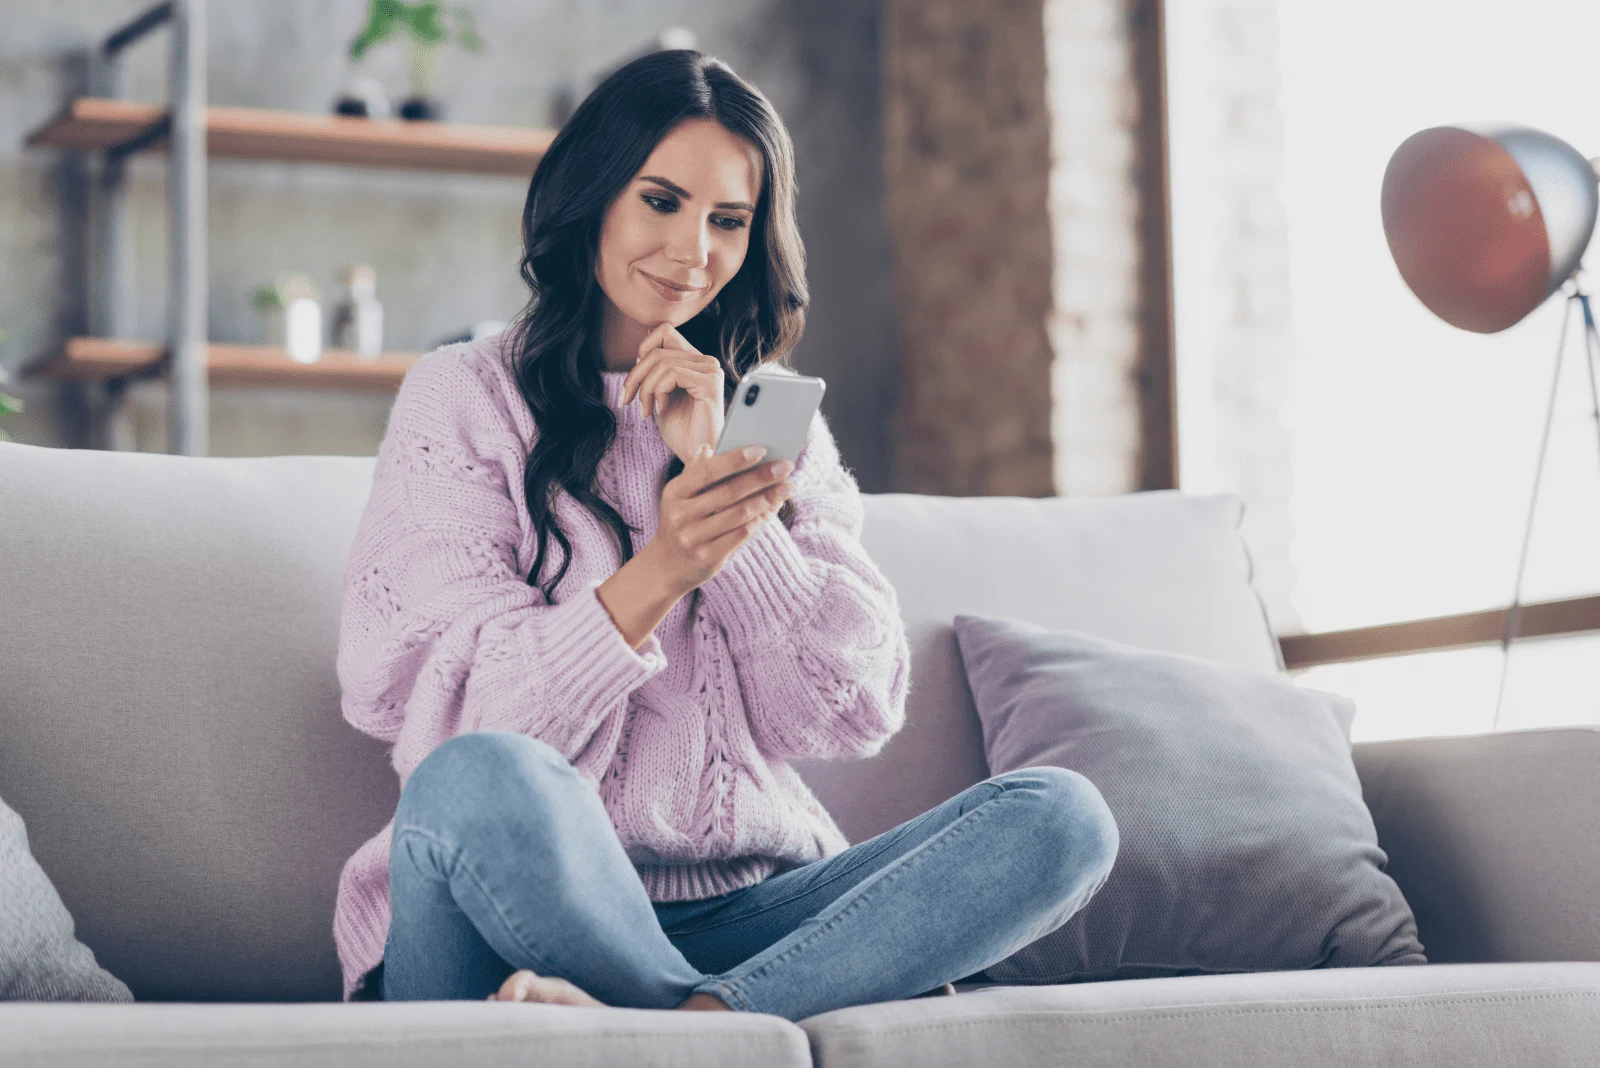 a woman with long black hair is sitting on the couch and typing on the phone